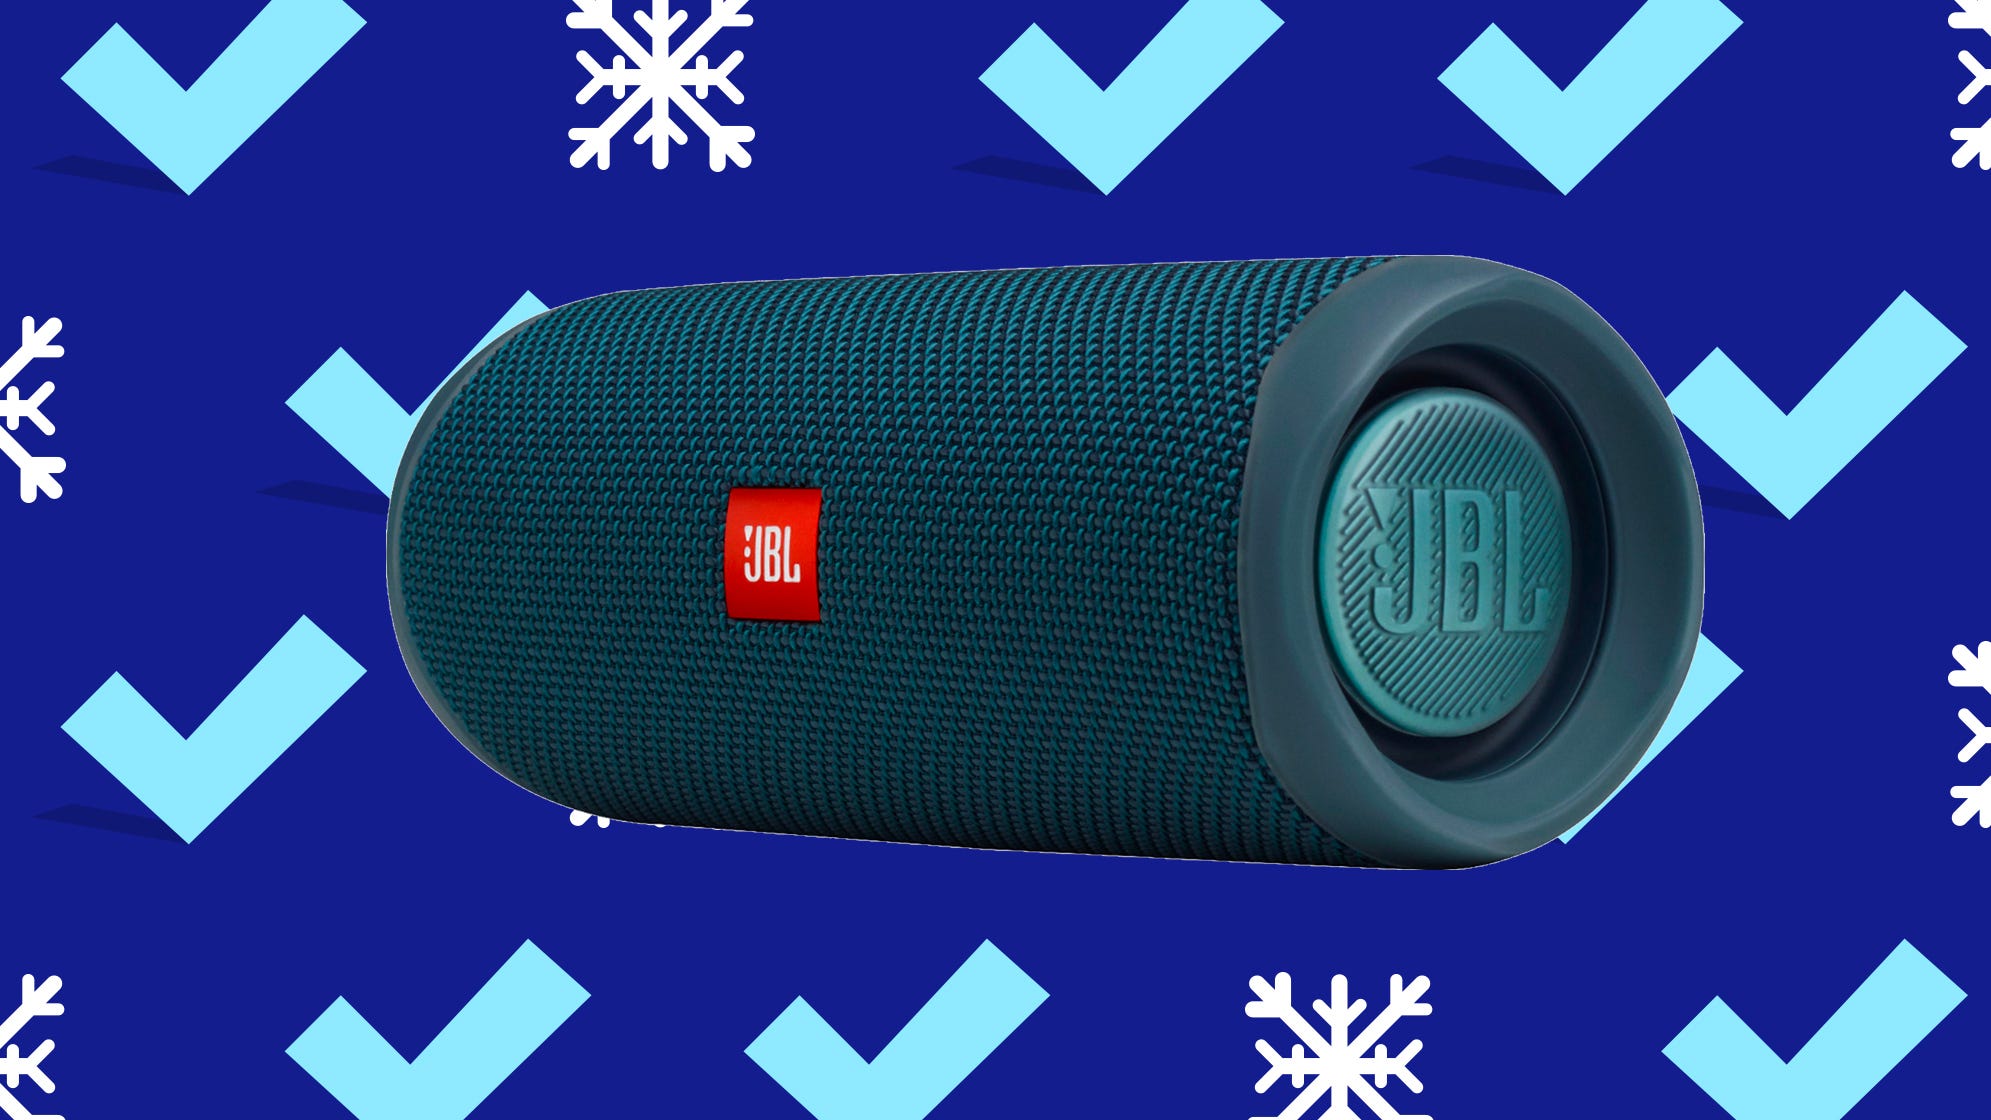 JBL Flip 5 Get this speaker at its lowest price ever for Black Friday